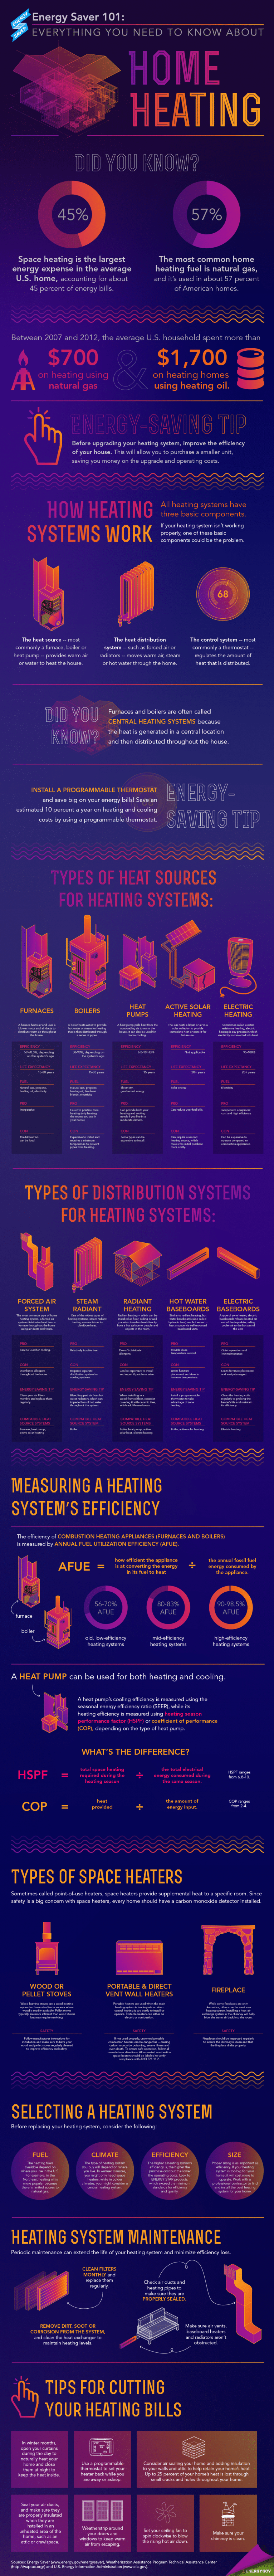 Home Heating Tips from the Energy Department